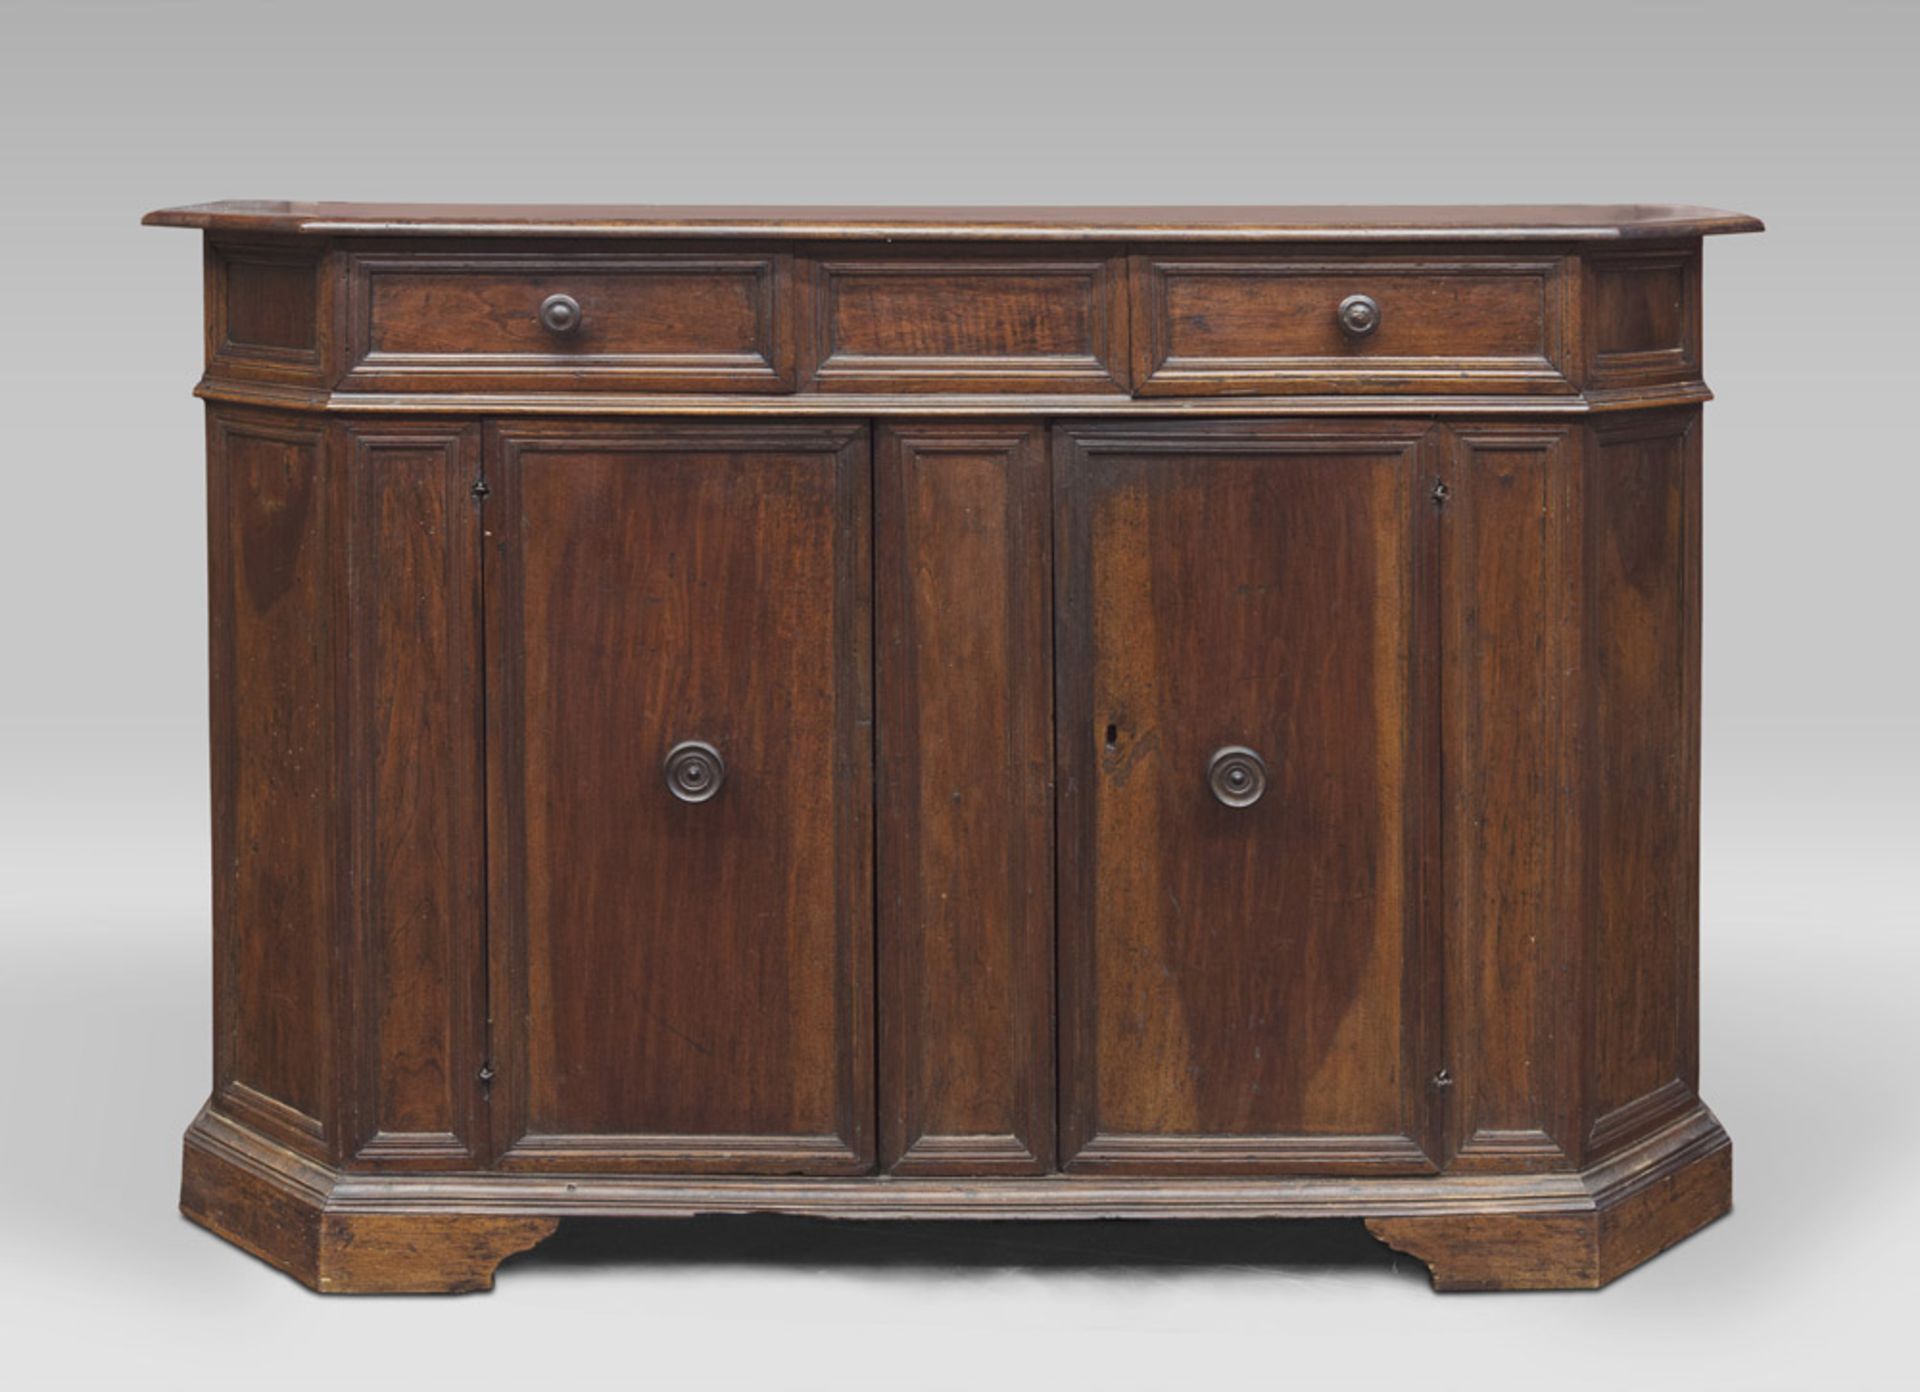 A WALNUT CUPBOARD, ITALY CENTRAL 18TH CENTURY of two drawers and two doors. Measures cm. 118 x 190 x